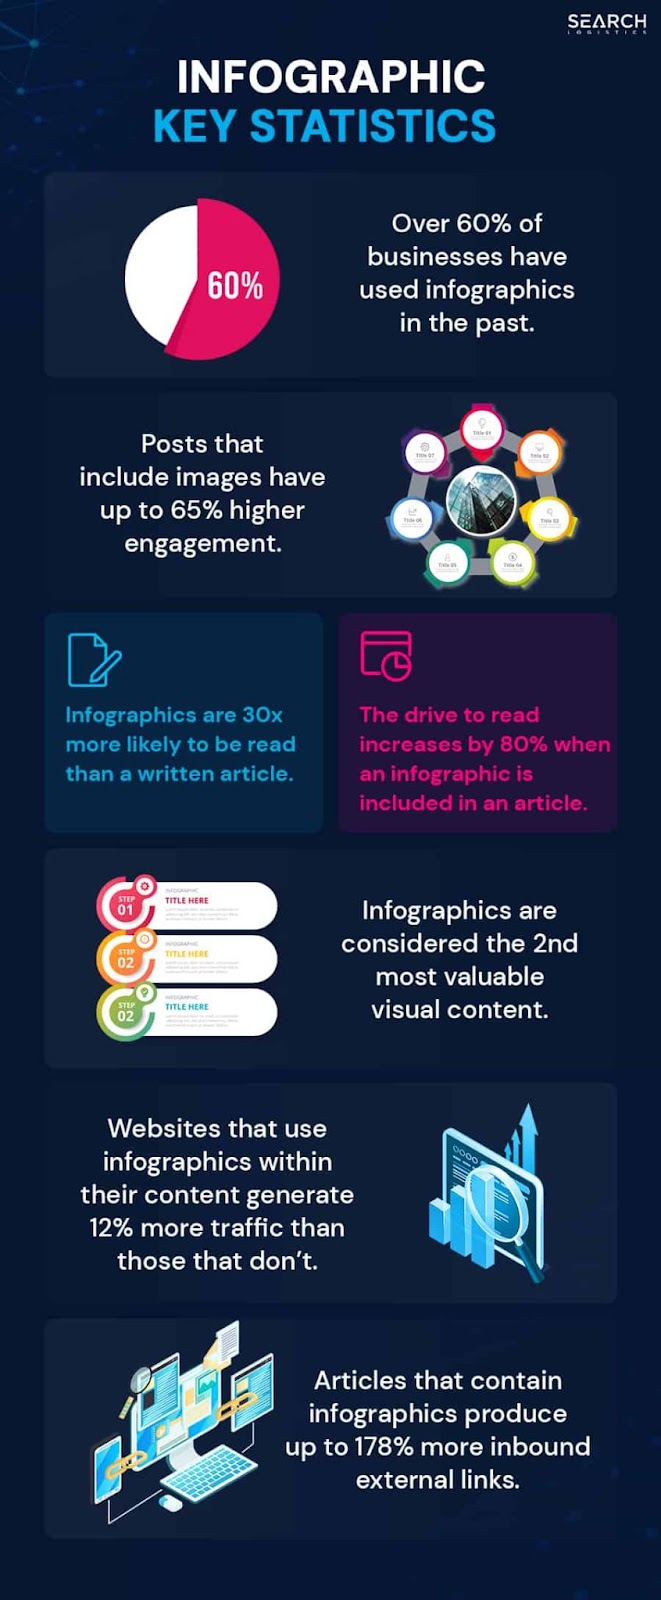 An infographic about infographics